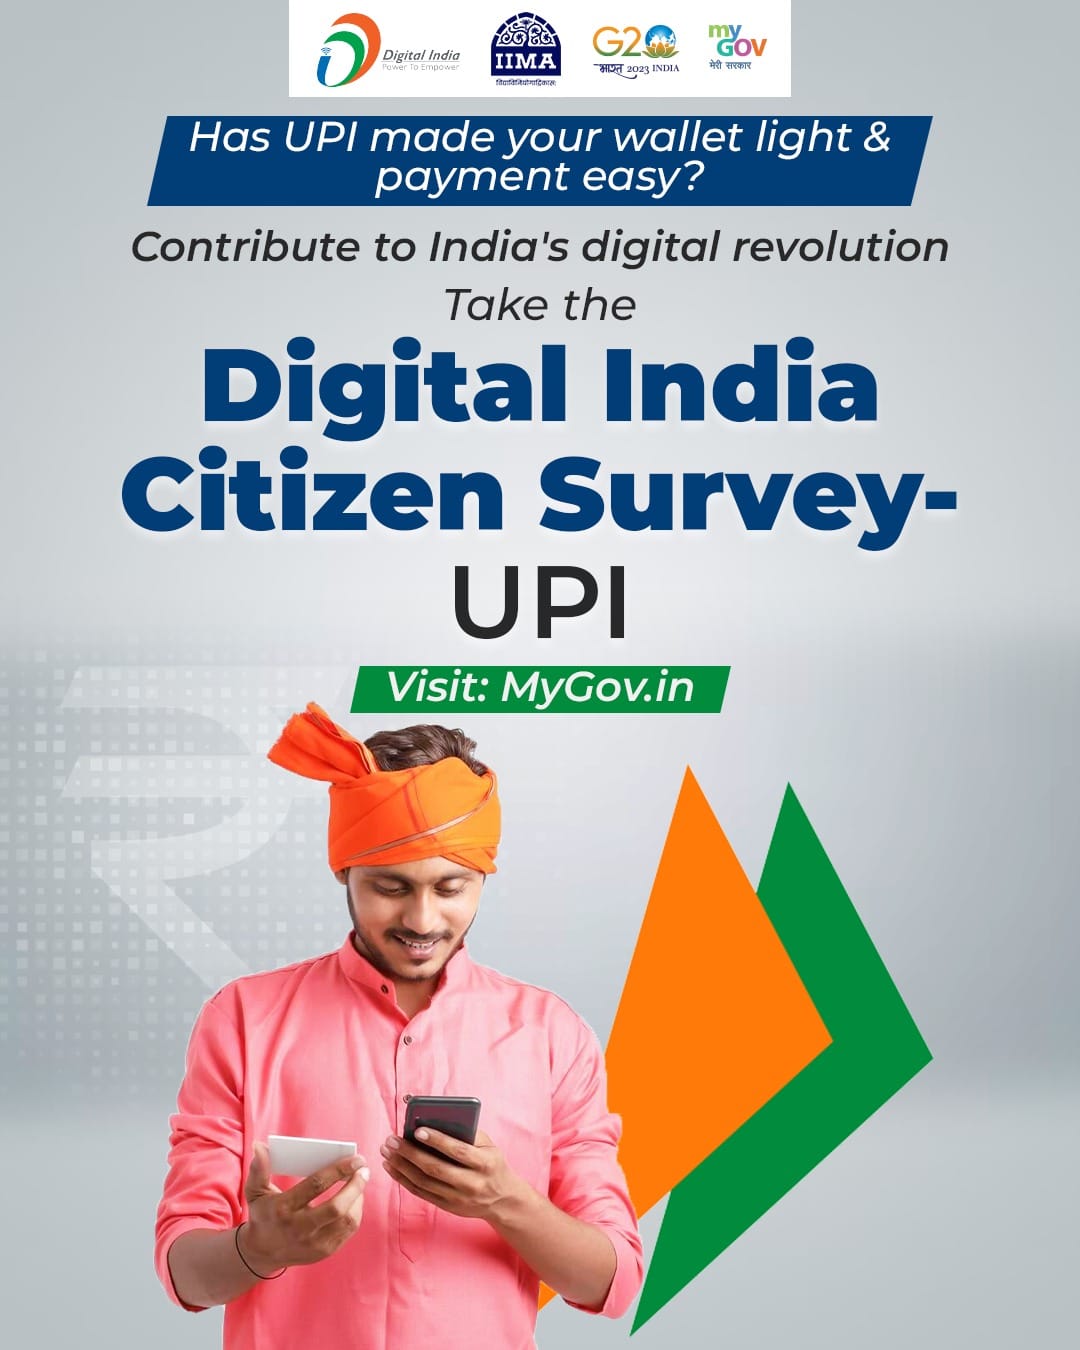 Engage in the "Digital India Citizen Survey - UPI" on #MyGov. Share your valuable insights